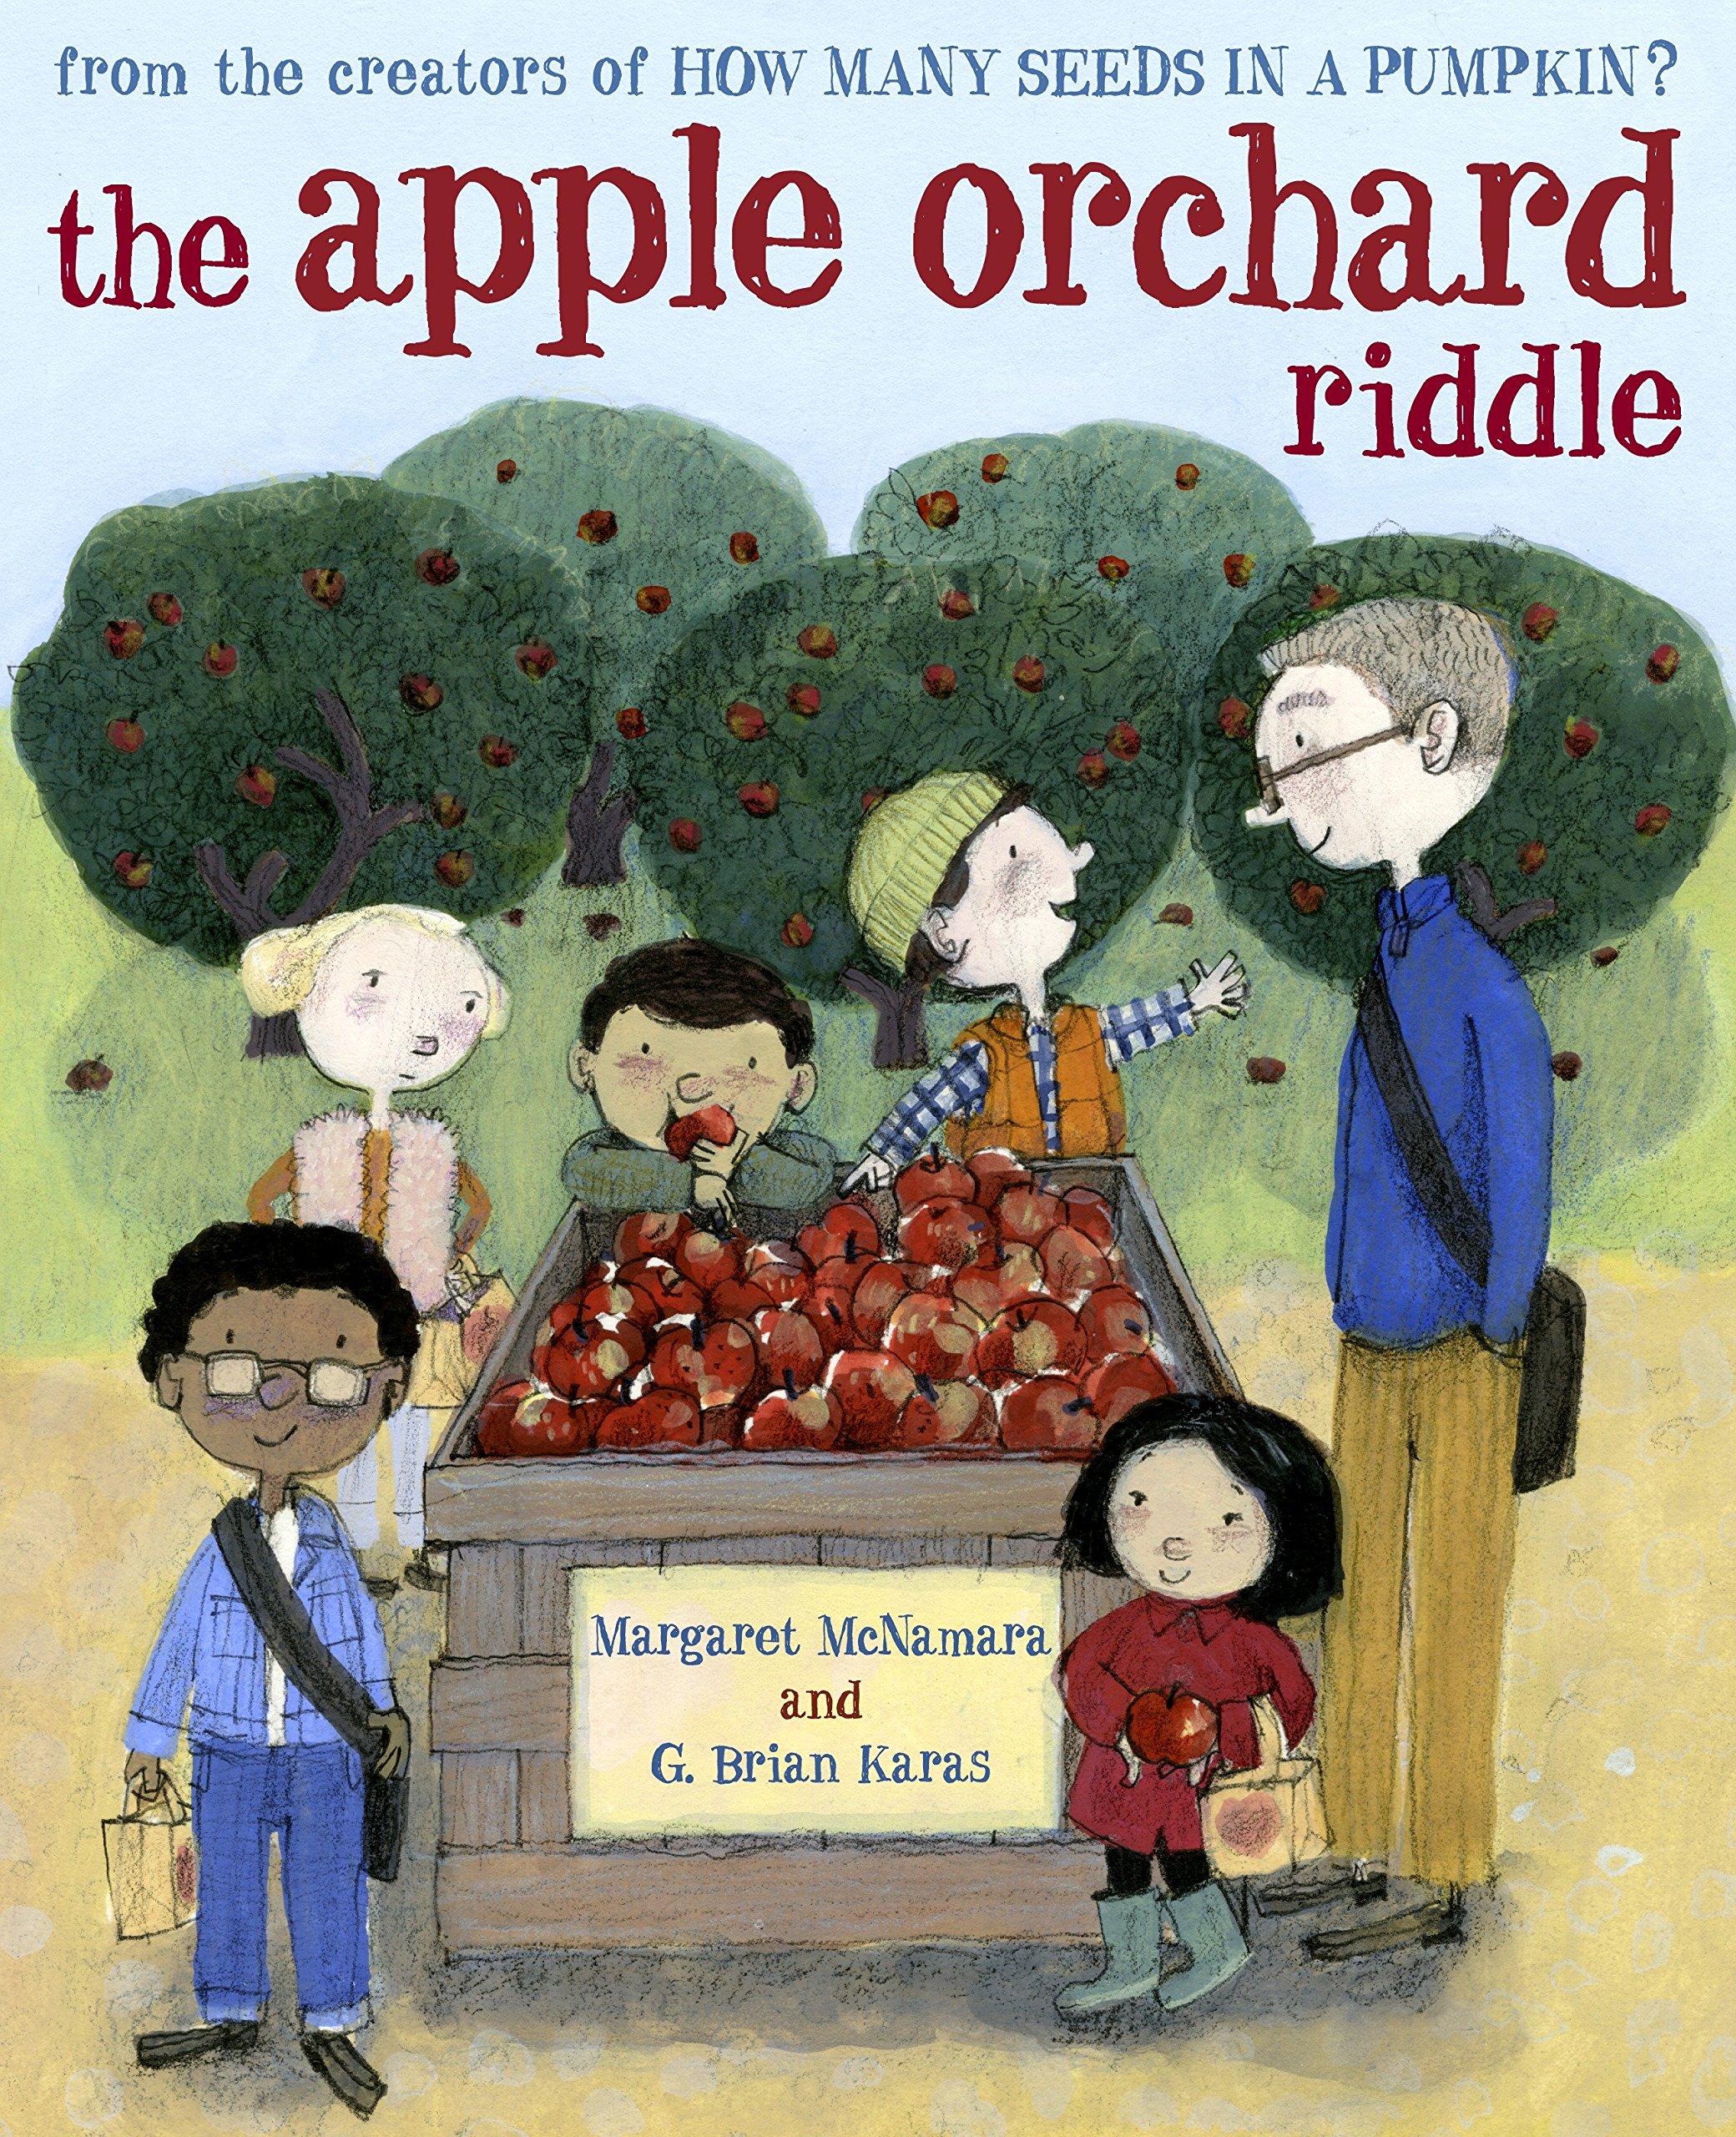 speech and language teaching concepts for The Apple Orchard Riddle in speech therapy​ ​